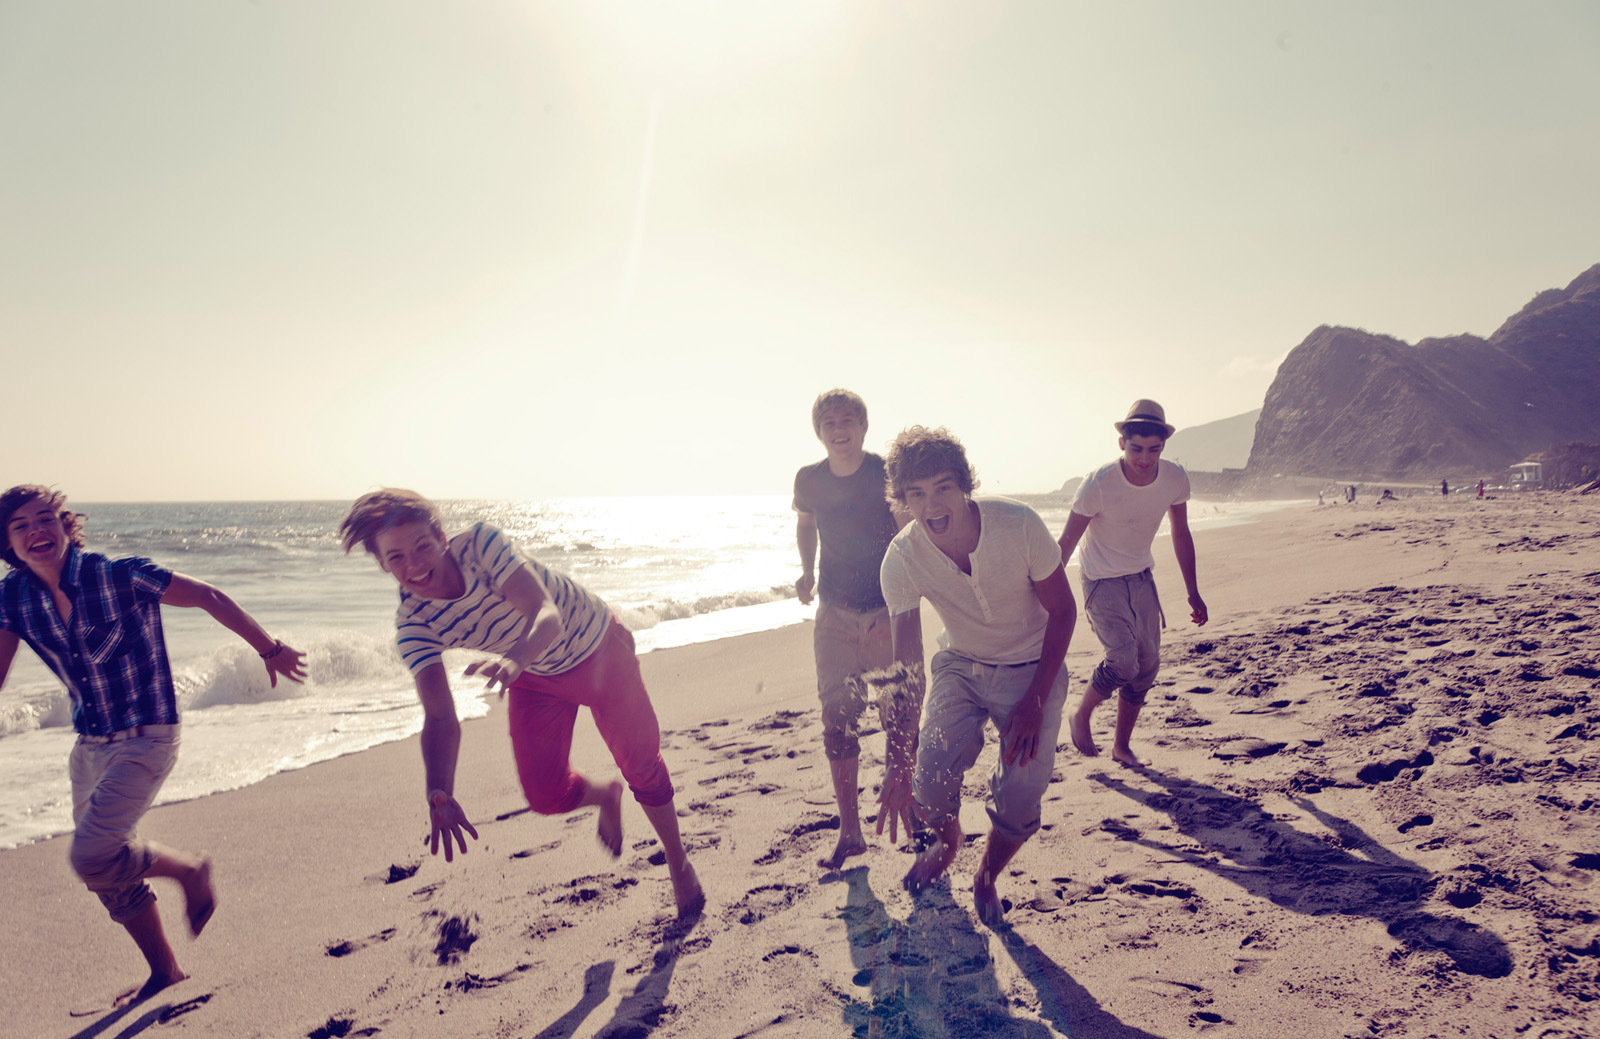 Harry Styles in Music Video: What Makes You Beautiful